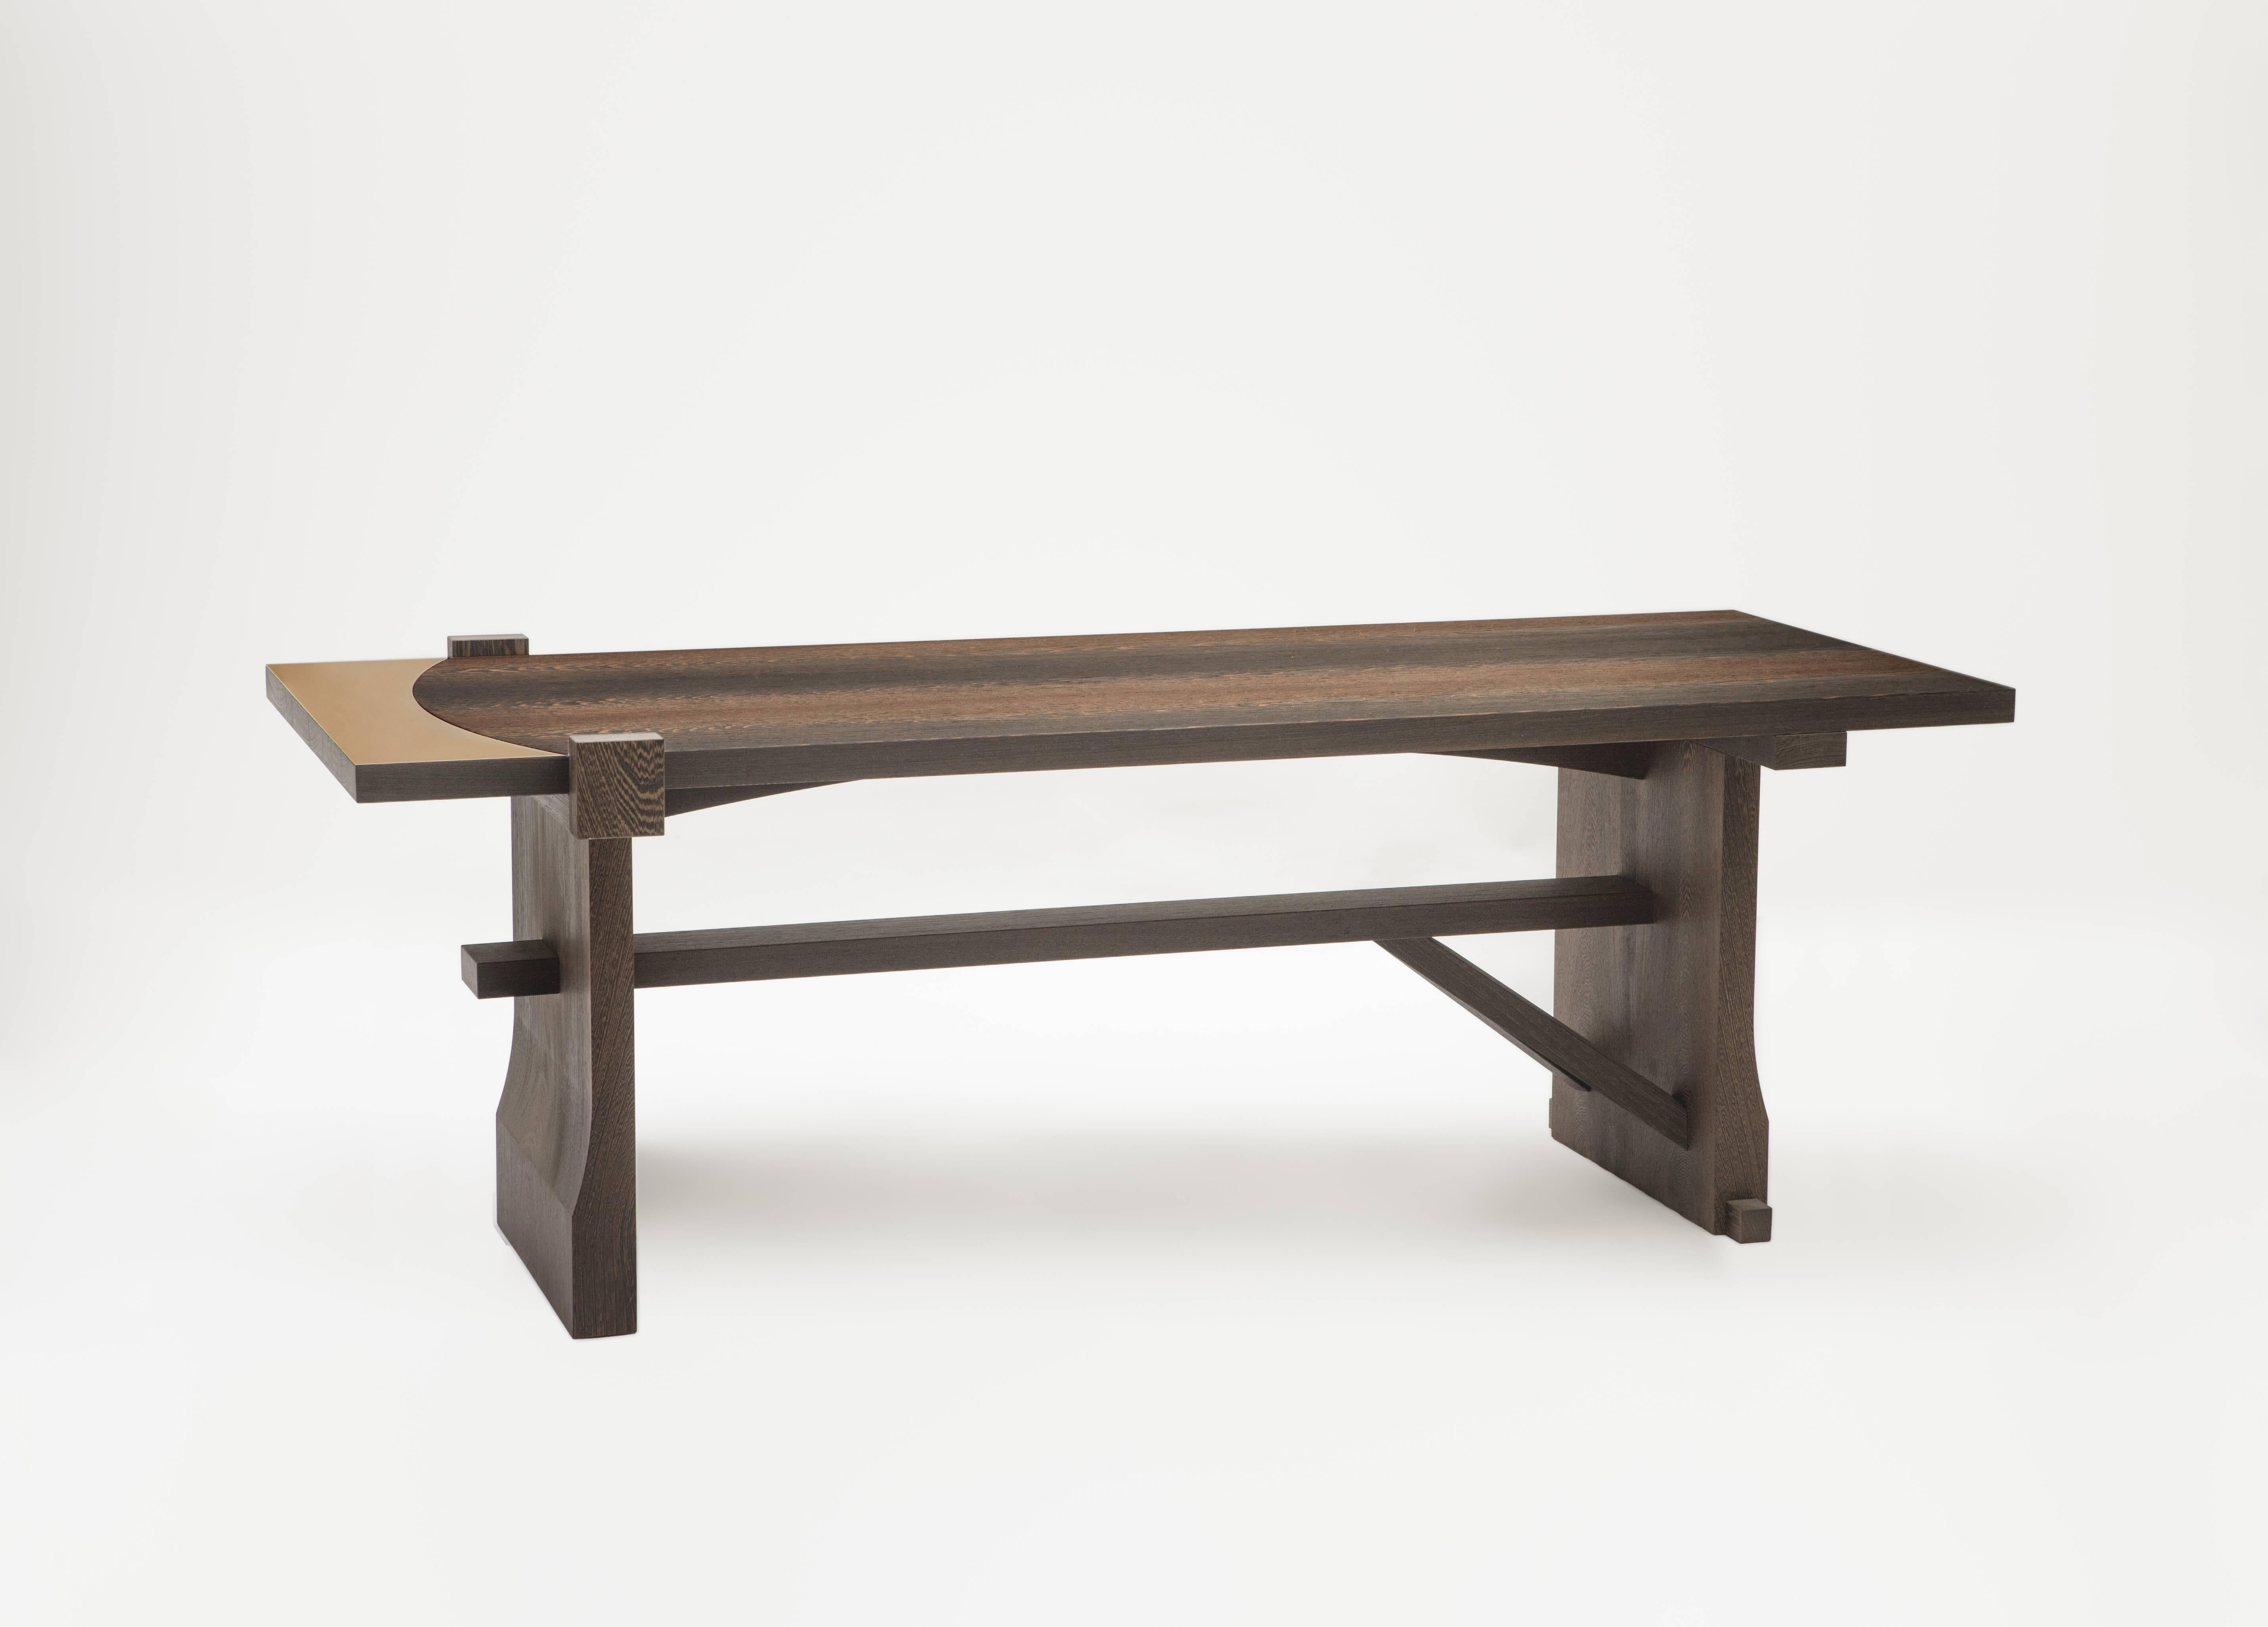 It is an attractive though rather minimalistic modern wenge dining table.
A timeless table that recalls the Italian tradition of sharing in simplicity, recalling the ancient image of the refectory, where meals were taken as a common ritual. Fratino